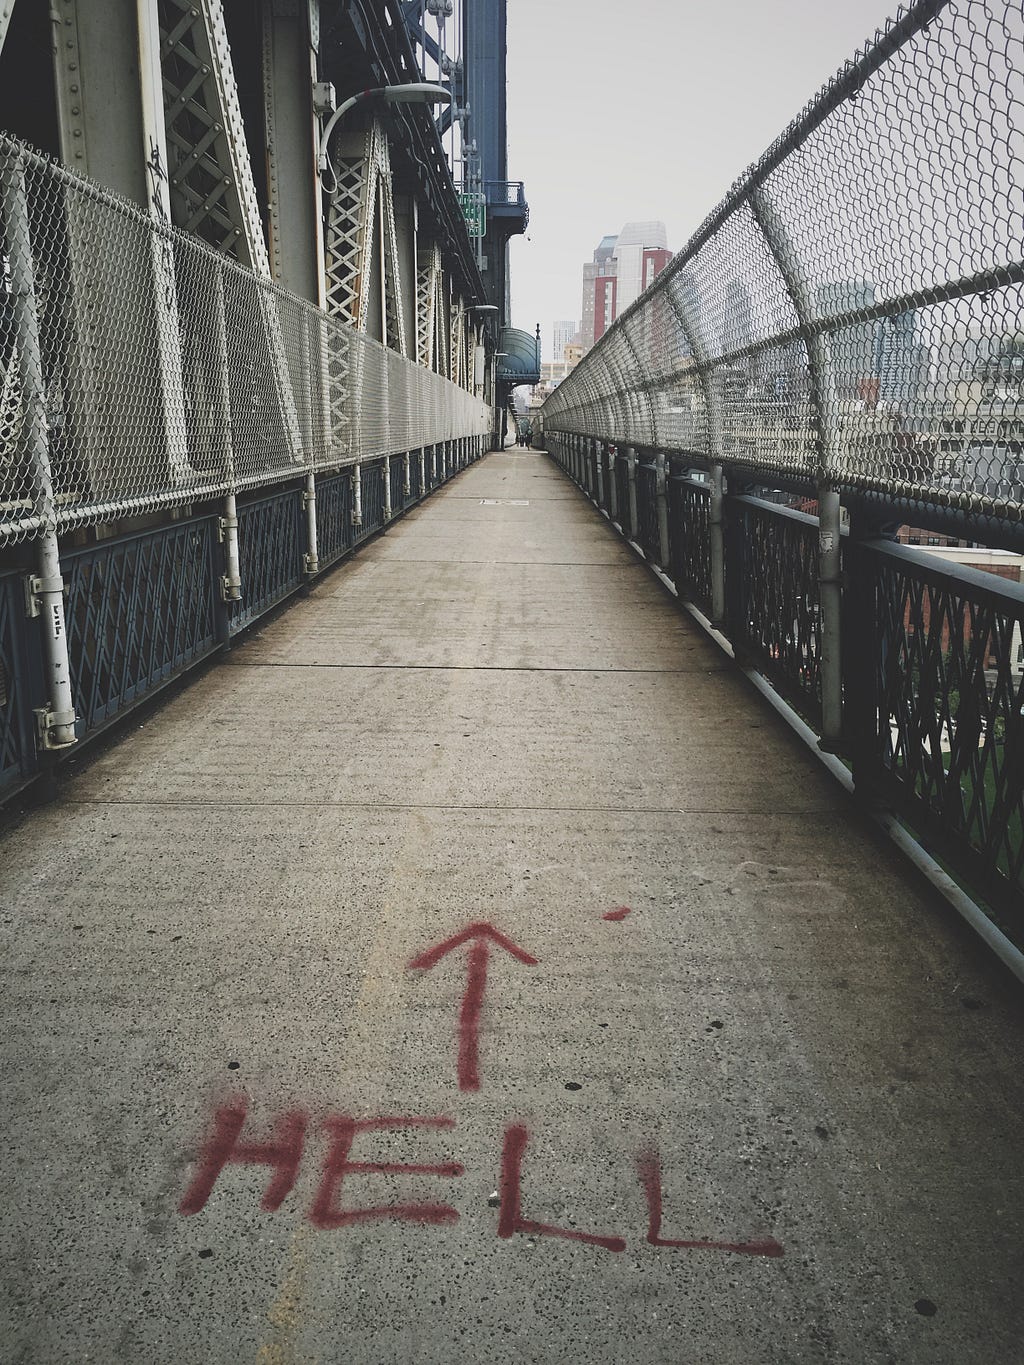 sidewalk spray painted with the world ‘hell’